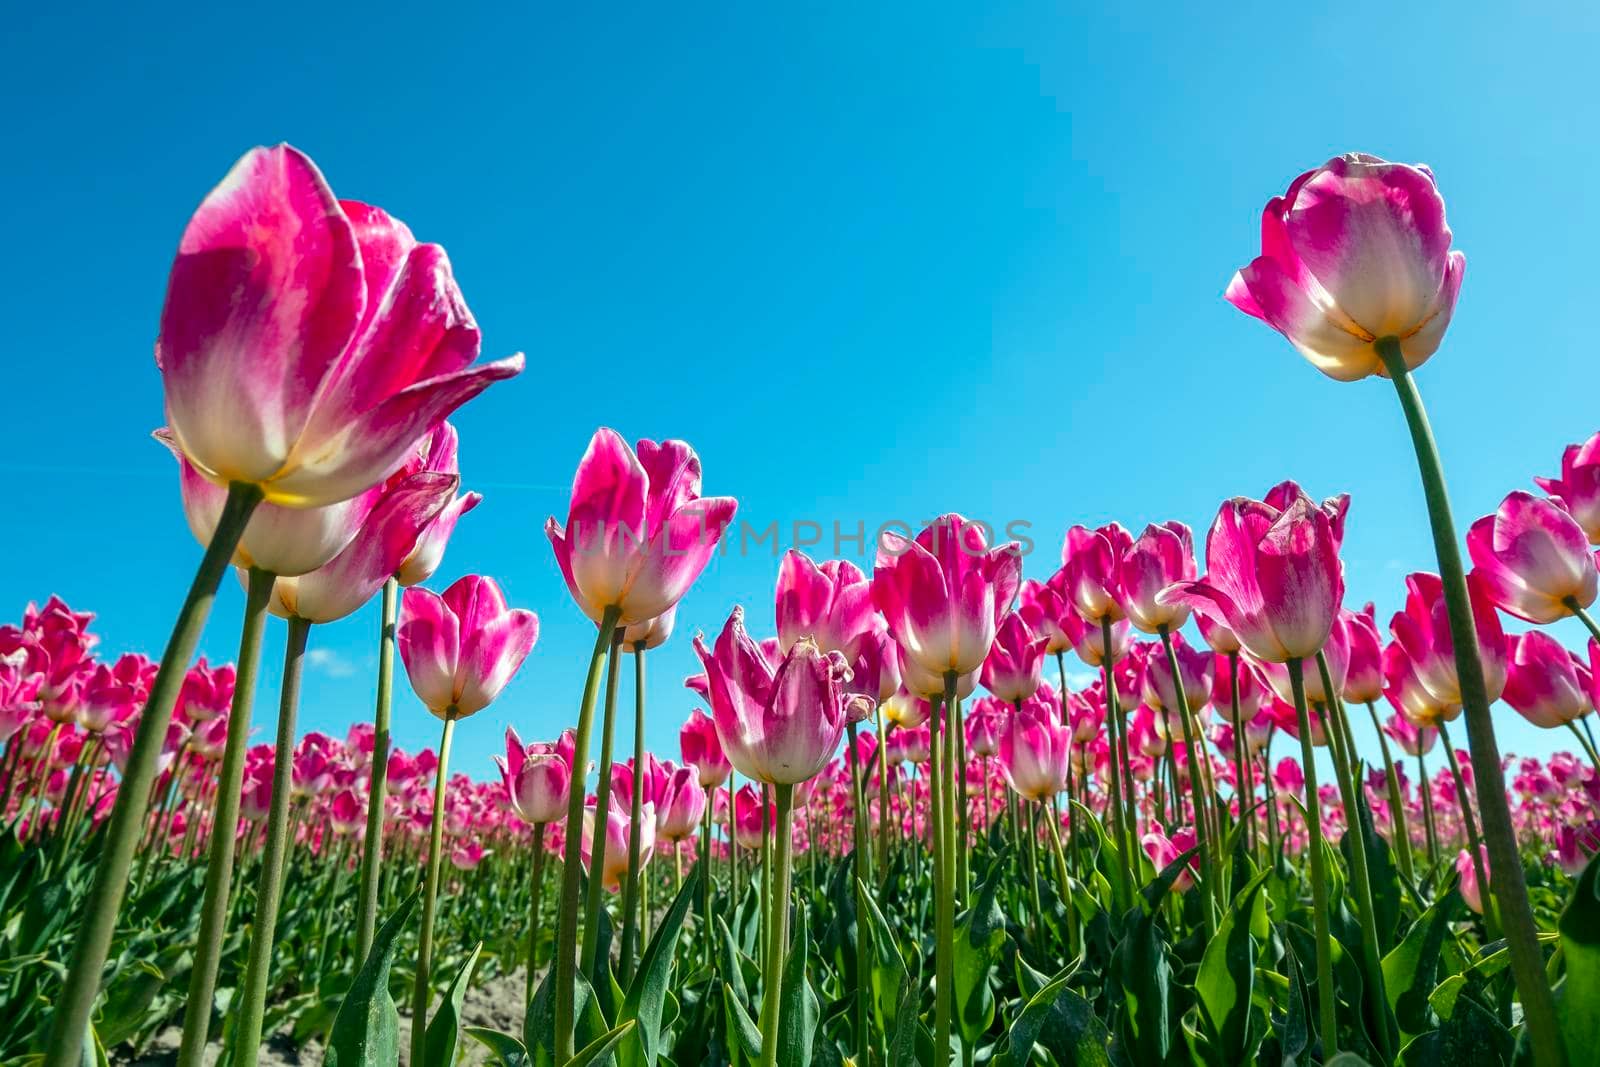 Blooming flower bulbs in the countryside from the Netherlands in spring